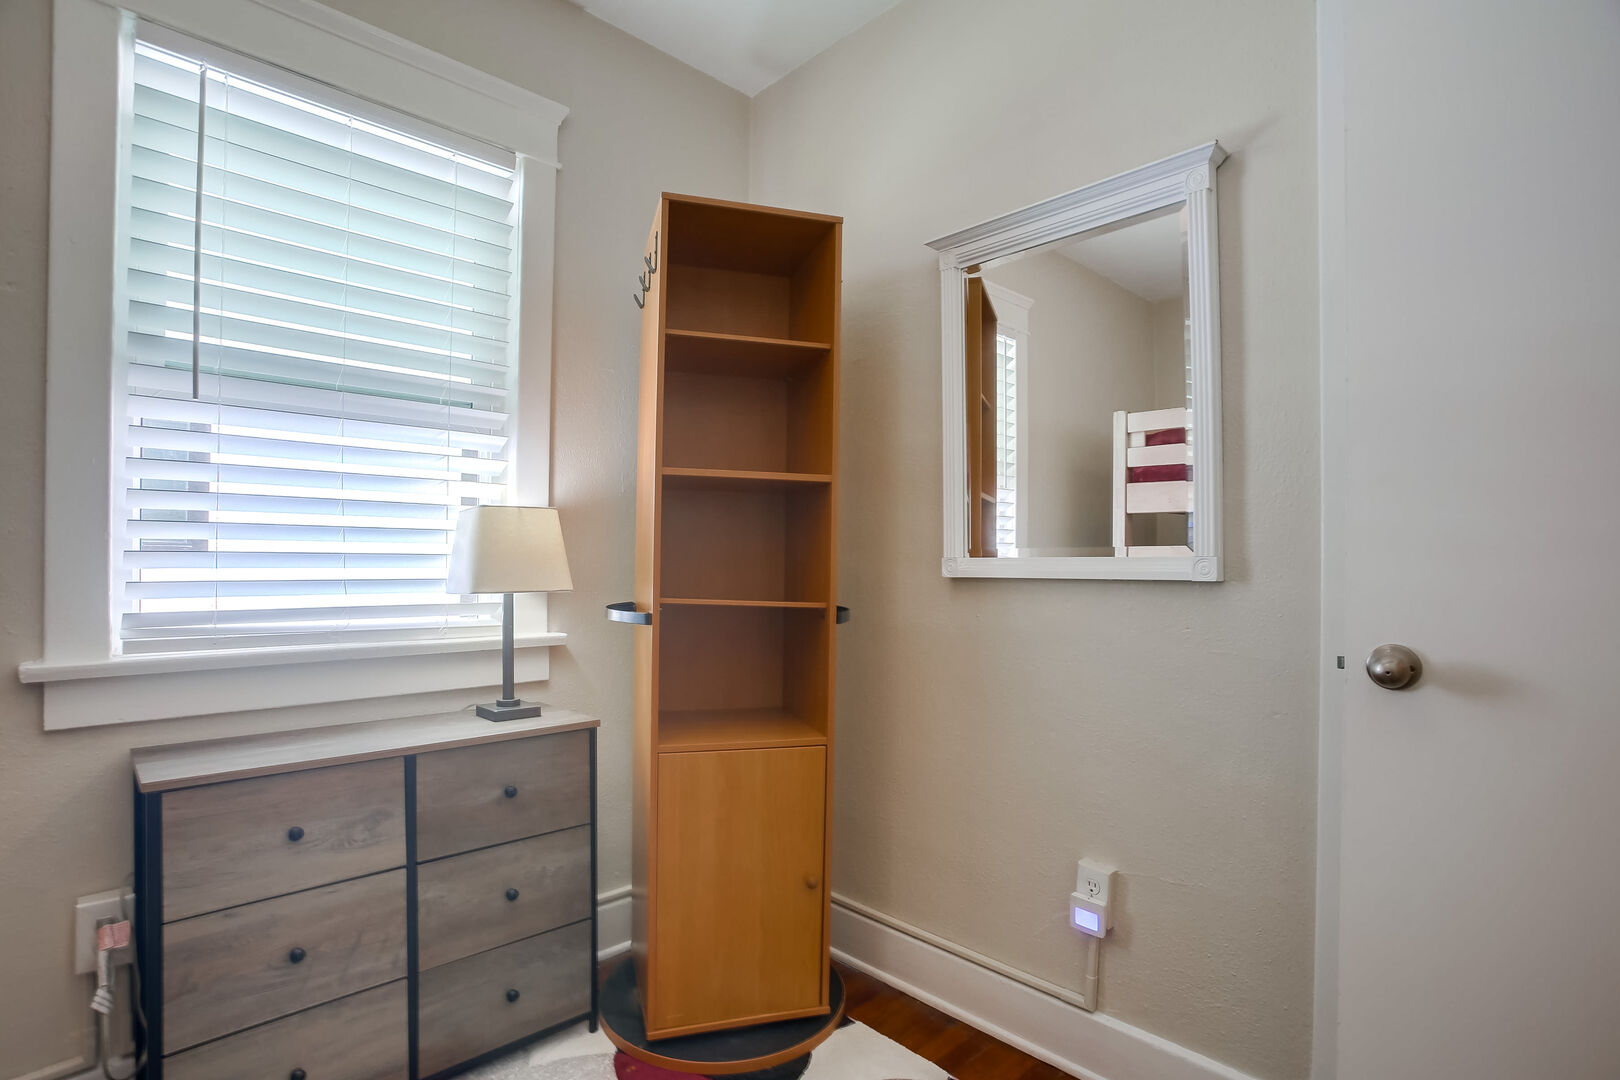 Storage in the guest room, also a small closet behind the door